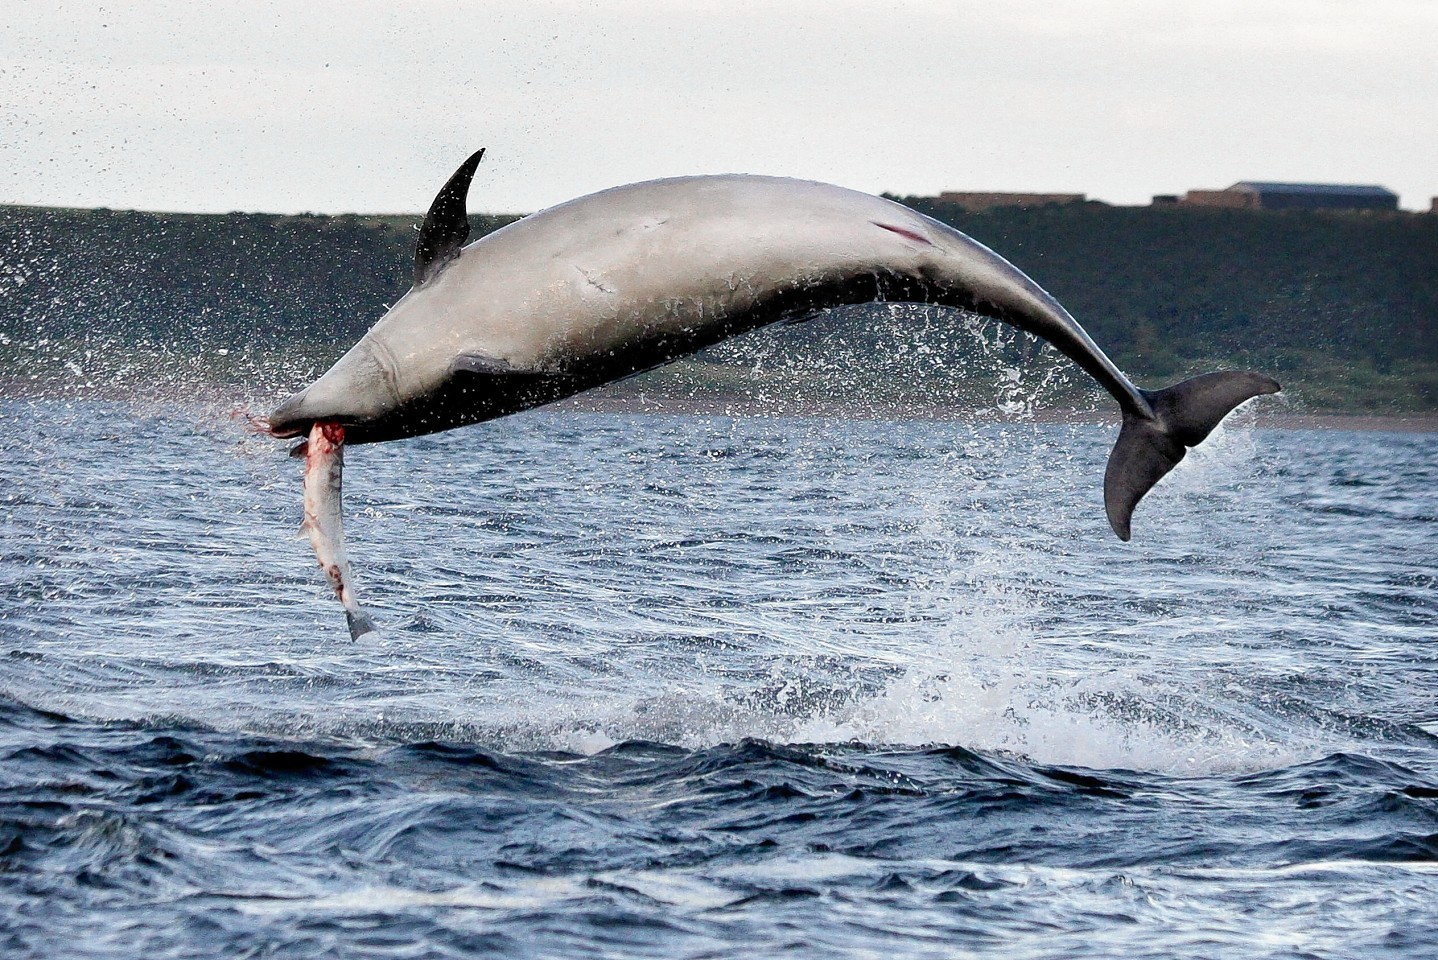 The bottle nose dolphin plays with his food as he jumps and catches a salmon